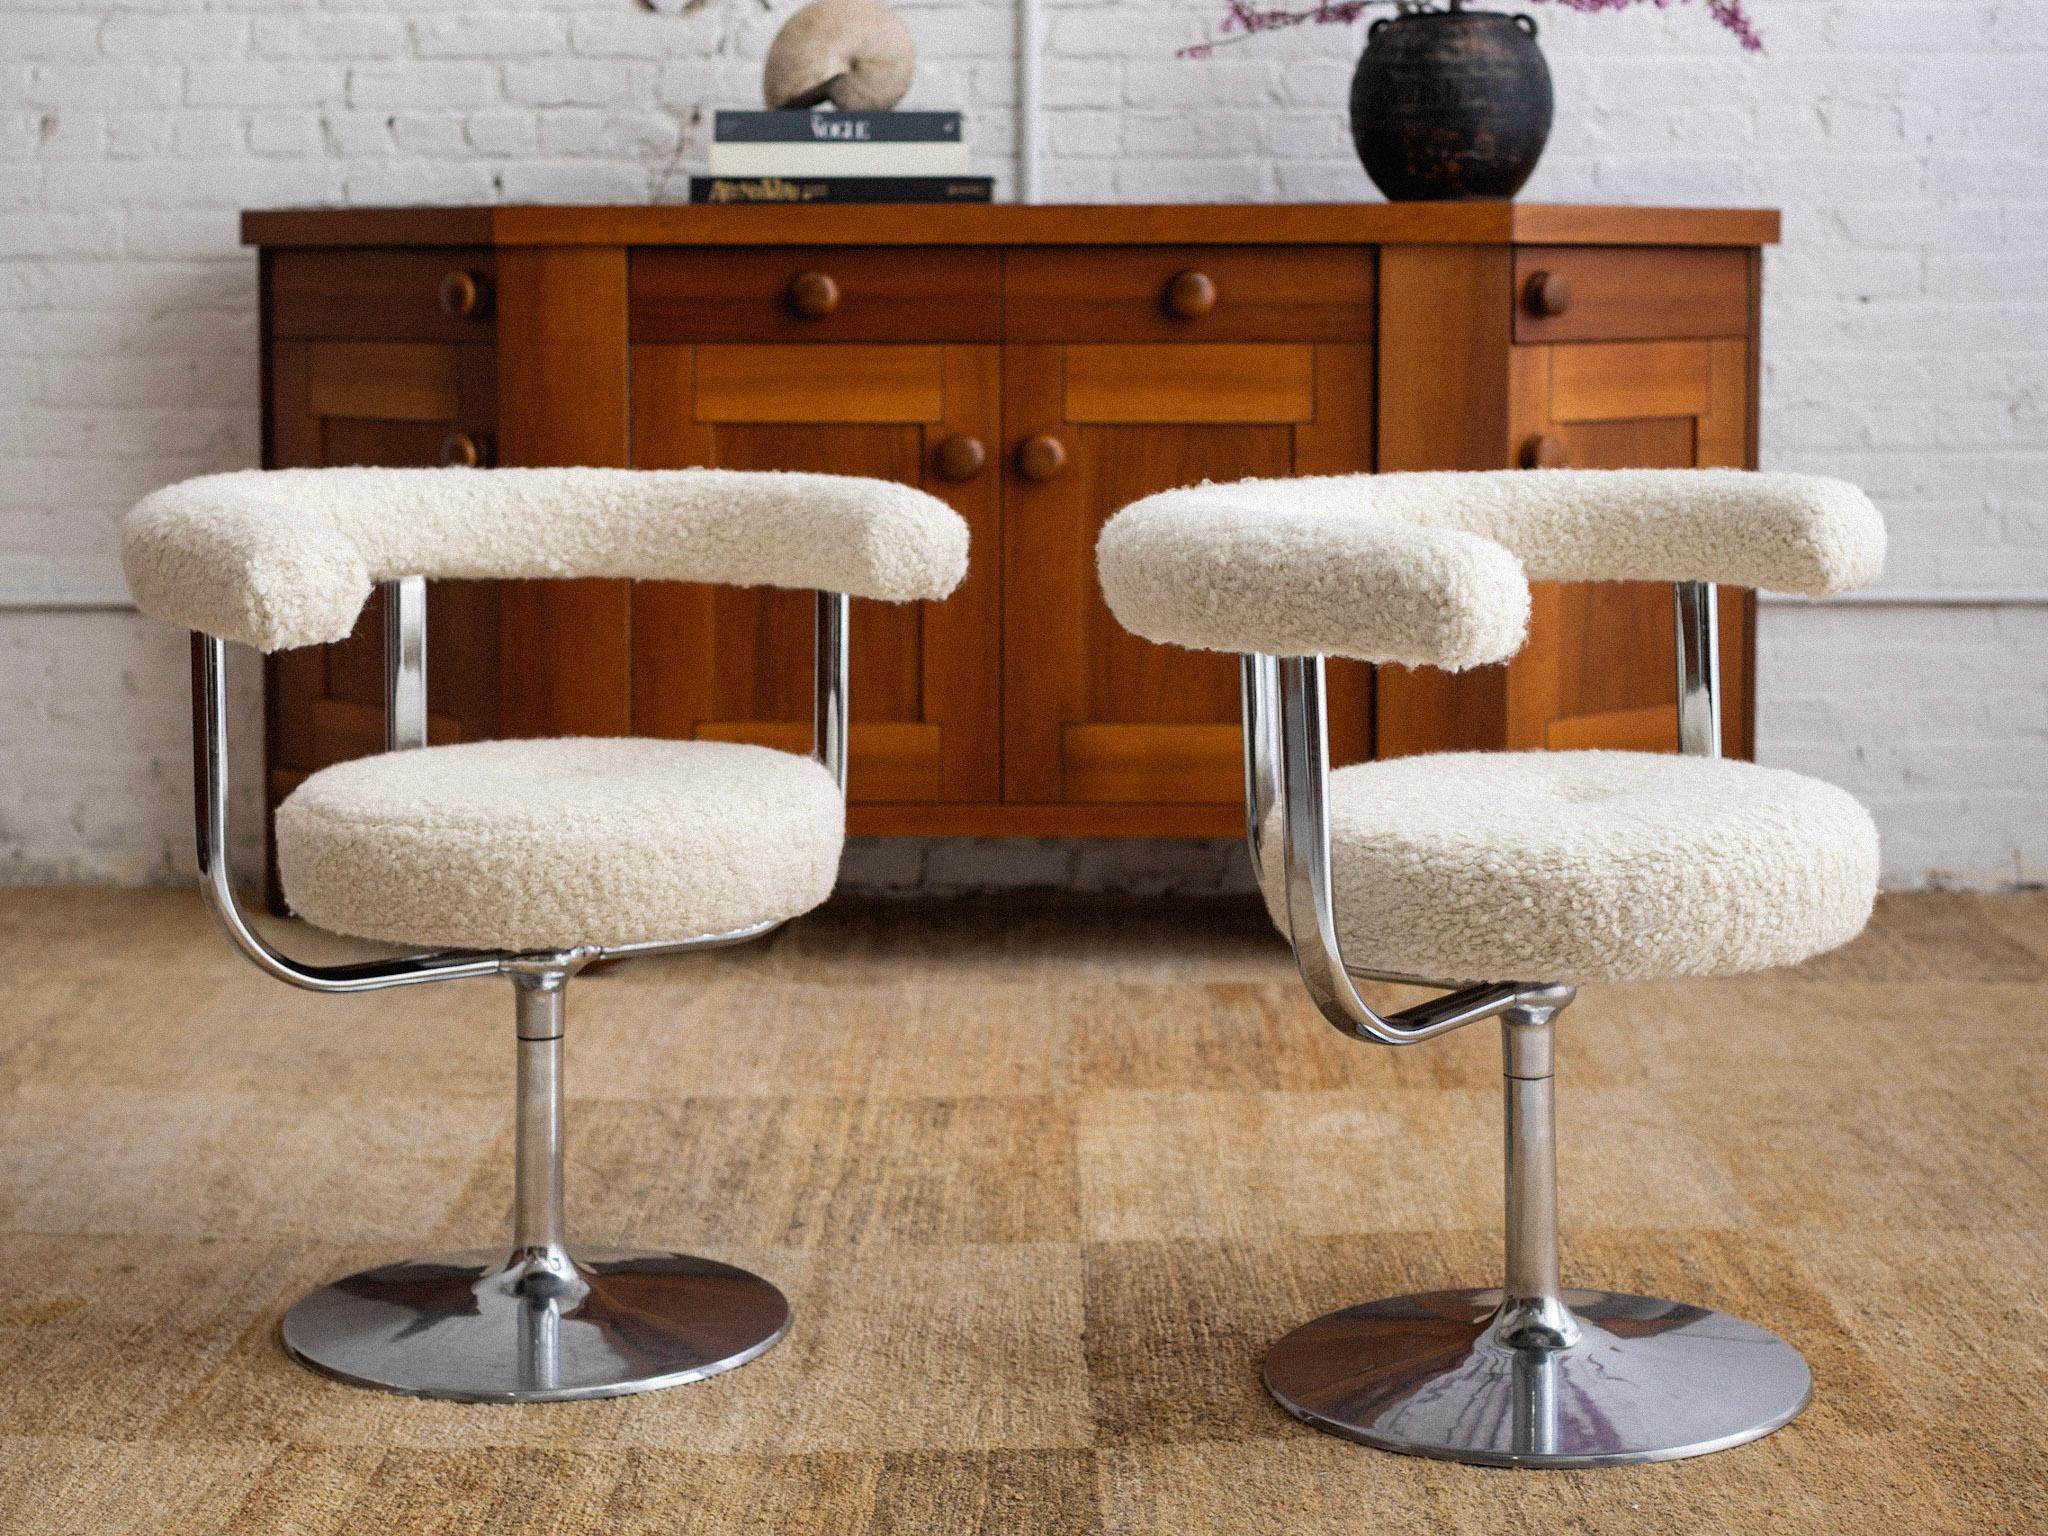 Finnish 1960s Chrome ‘Polar’ Chairs by Esko Pajamies for Lepo, Finland, a Pair For Sale